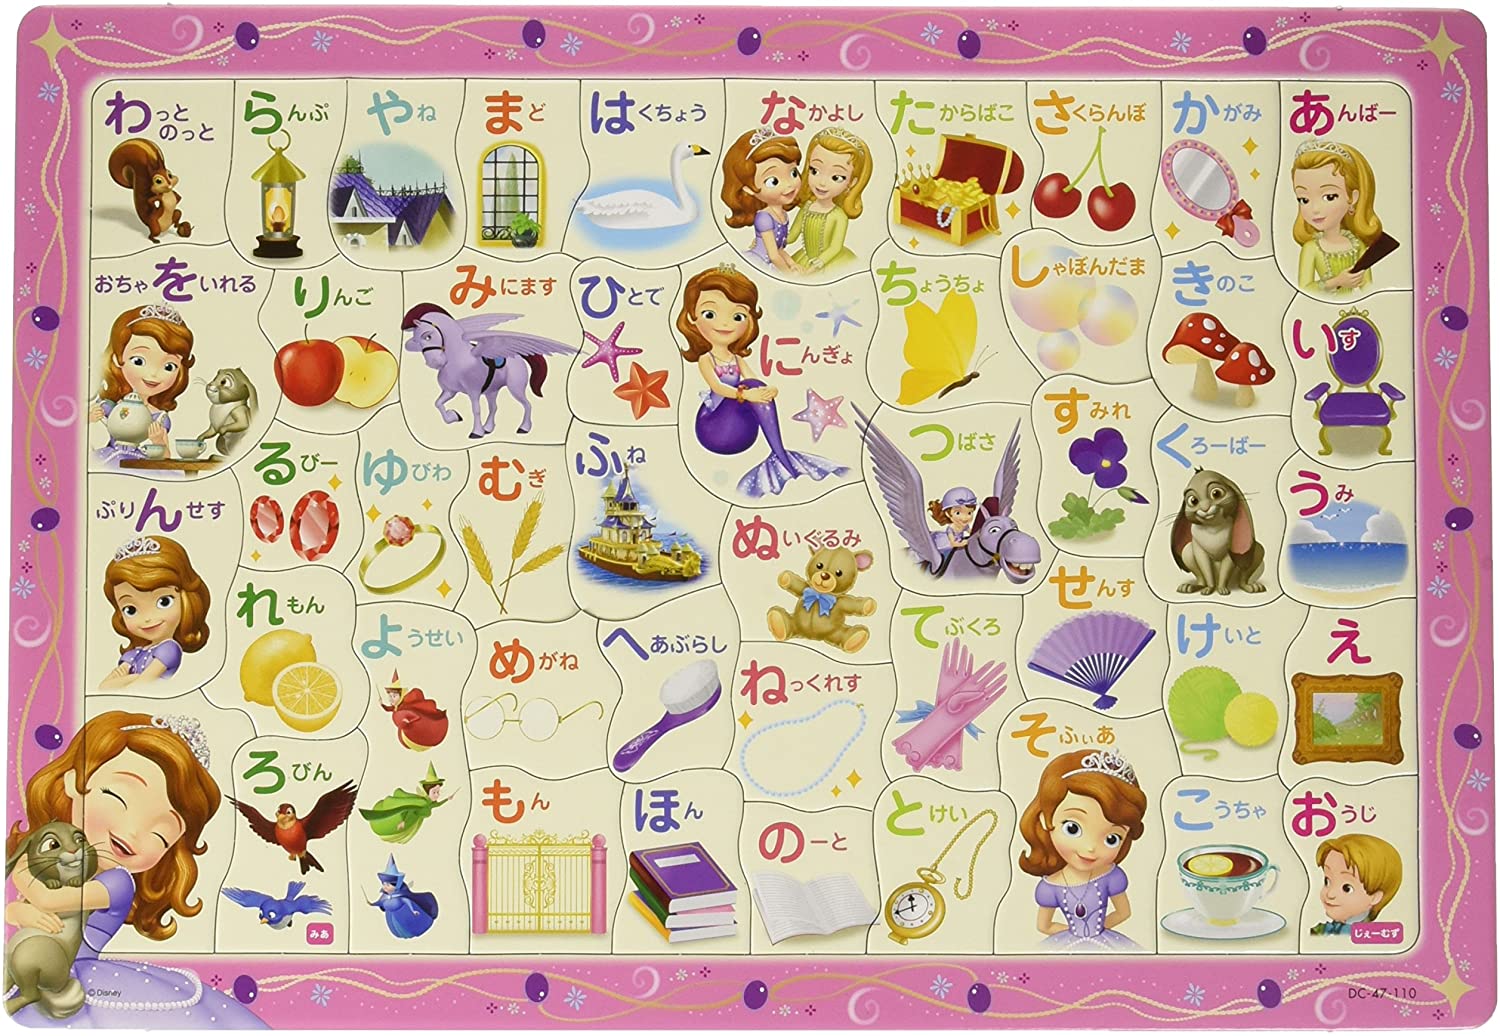 New Disney 1000 piece jigsaw puzzle  memorable words 51x73.5cm F/S from Japan 